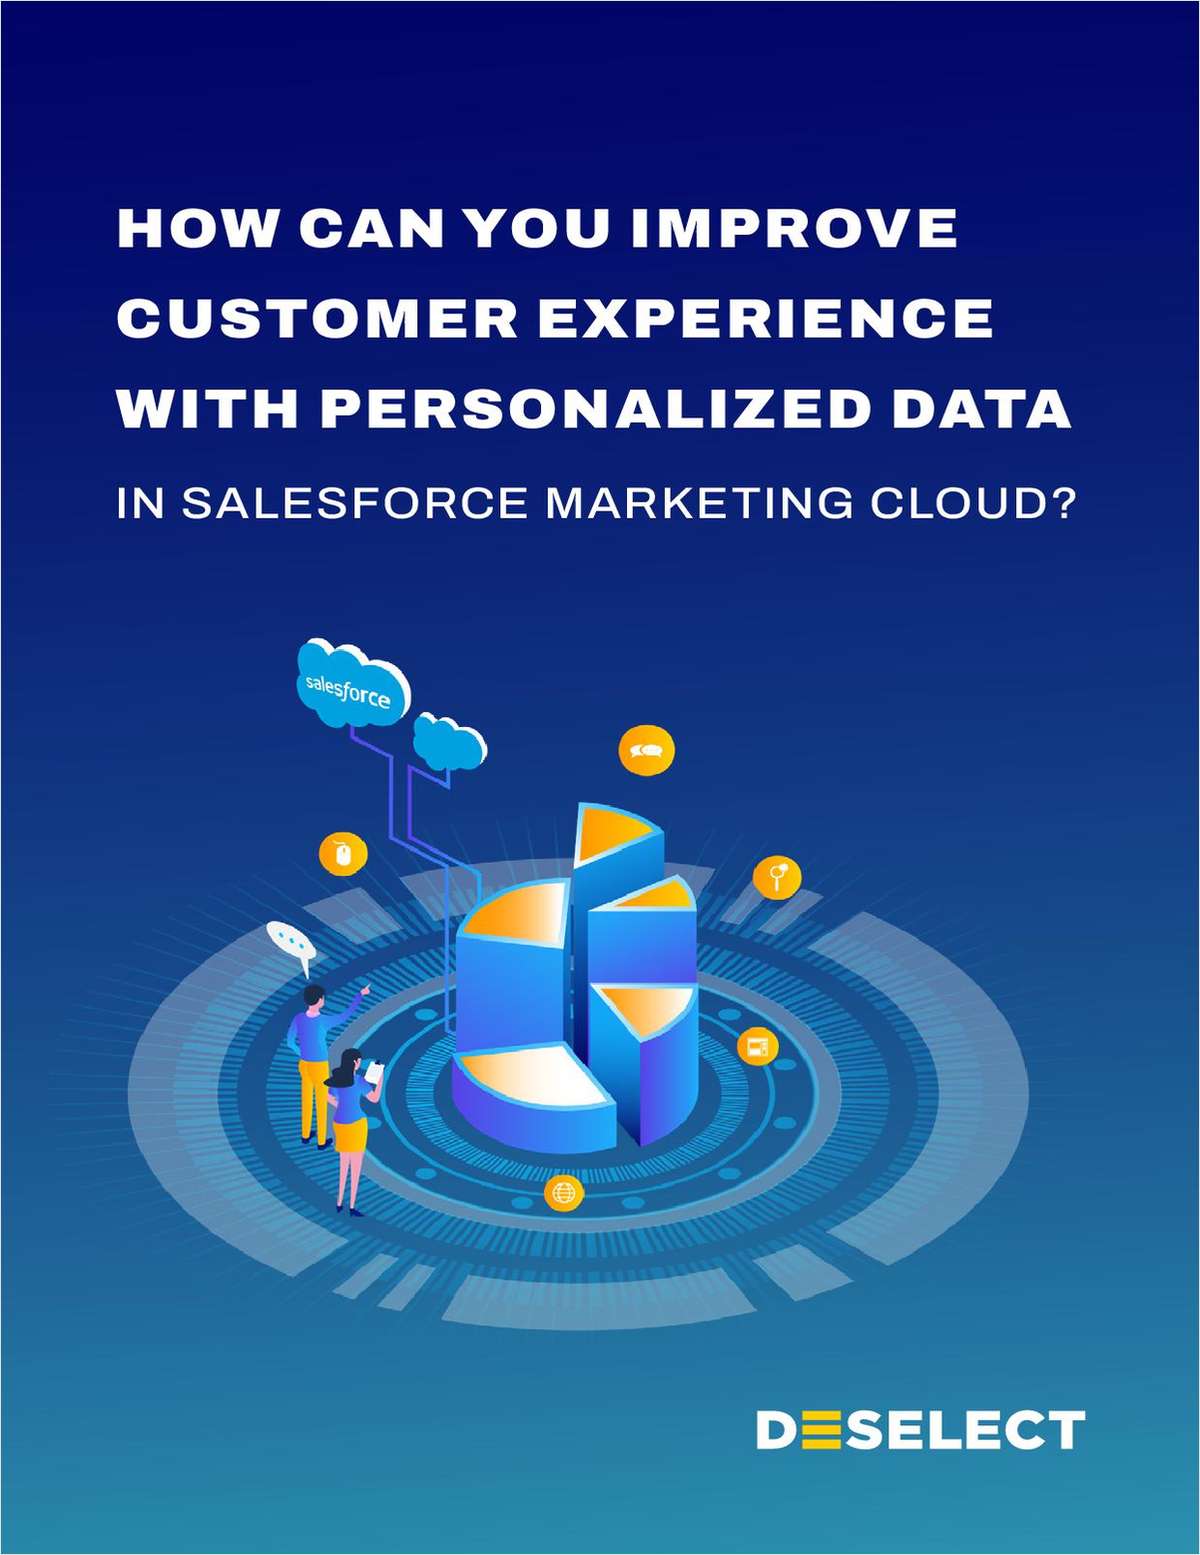 Salesforce Marketing Cloud and improved customer experience with personalised data